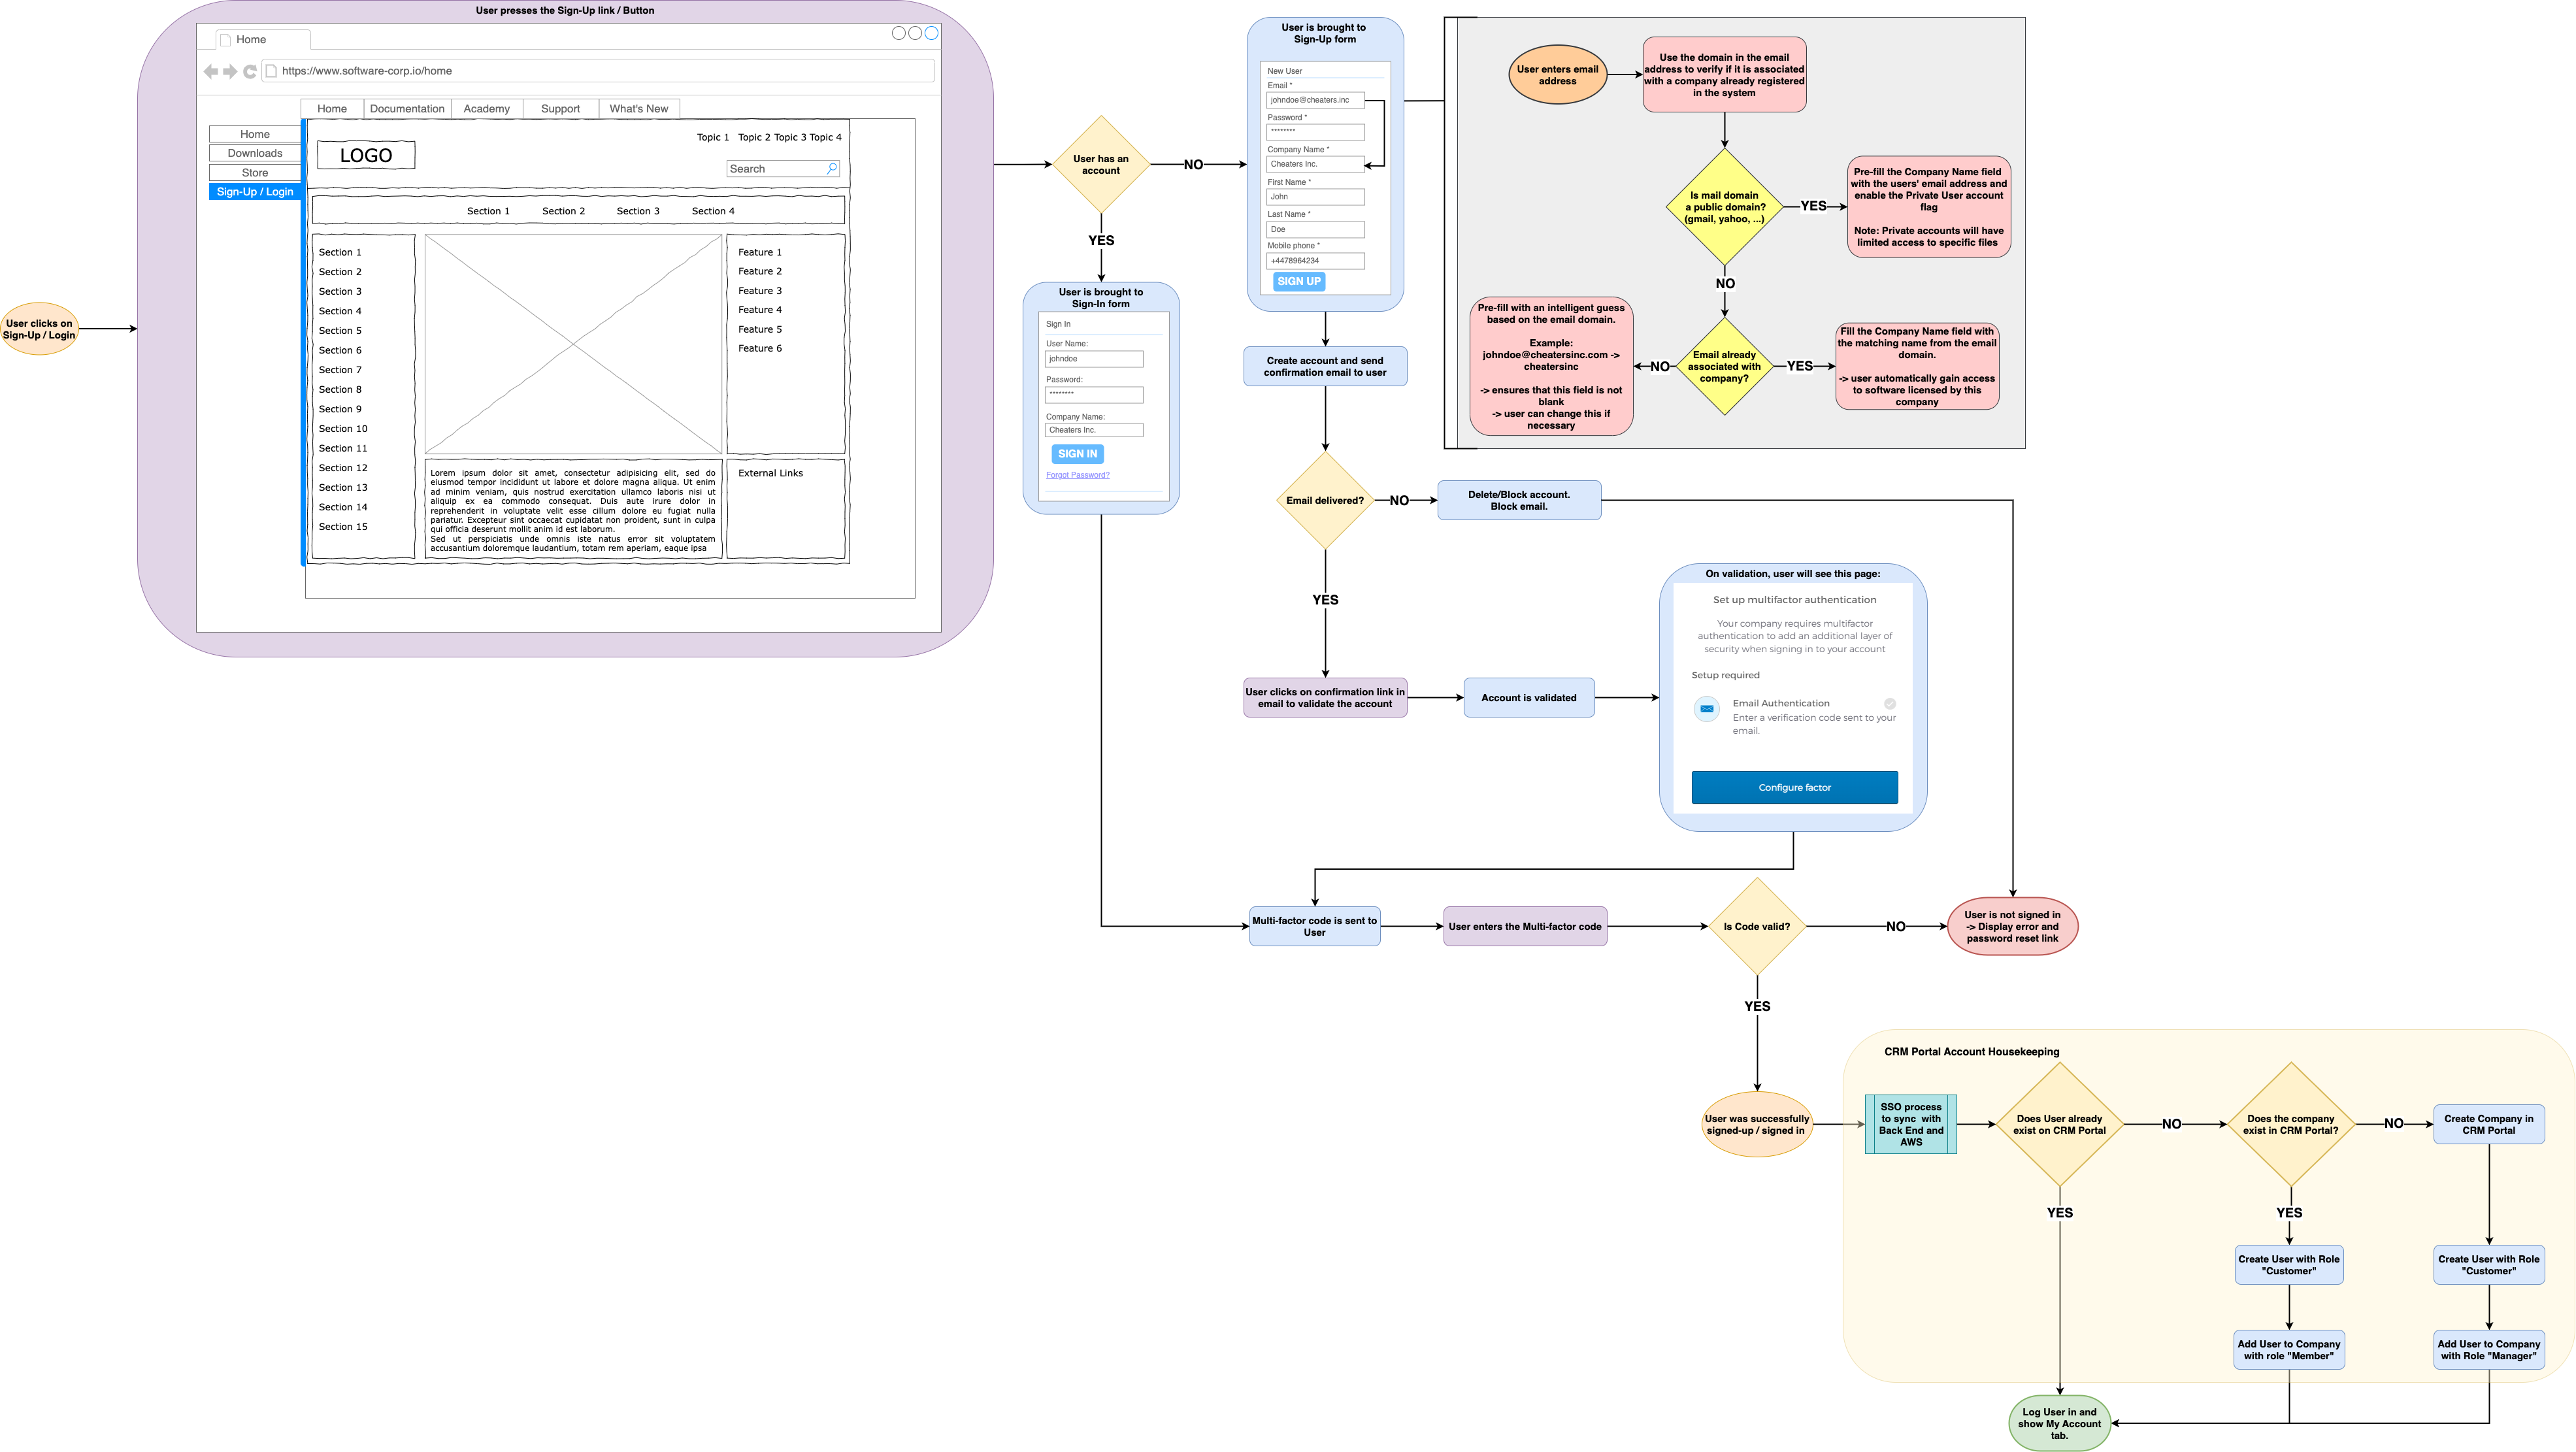 A requirements flow diagram for signing into or up for a website that is a mixture of a flow chart, entity relation, and interface mock-up